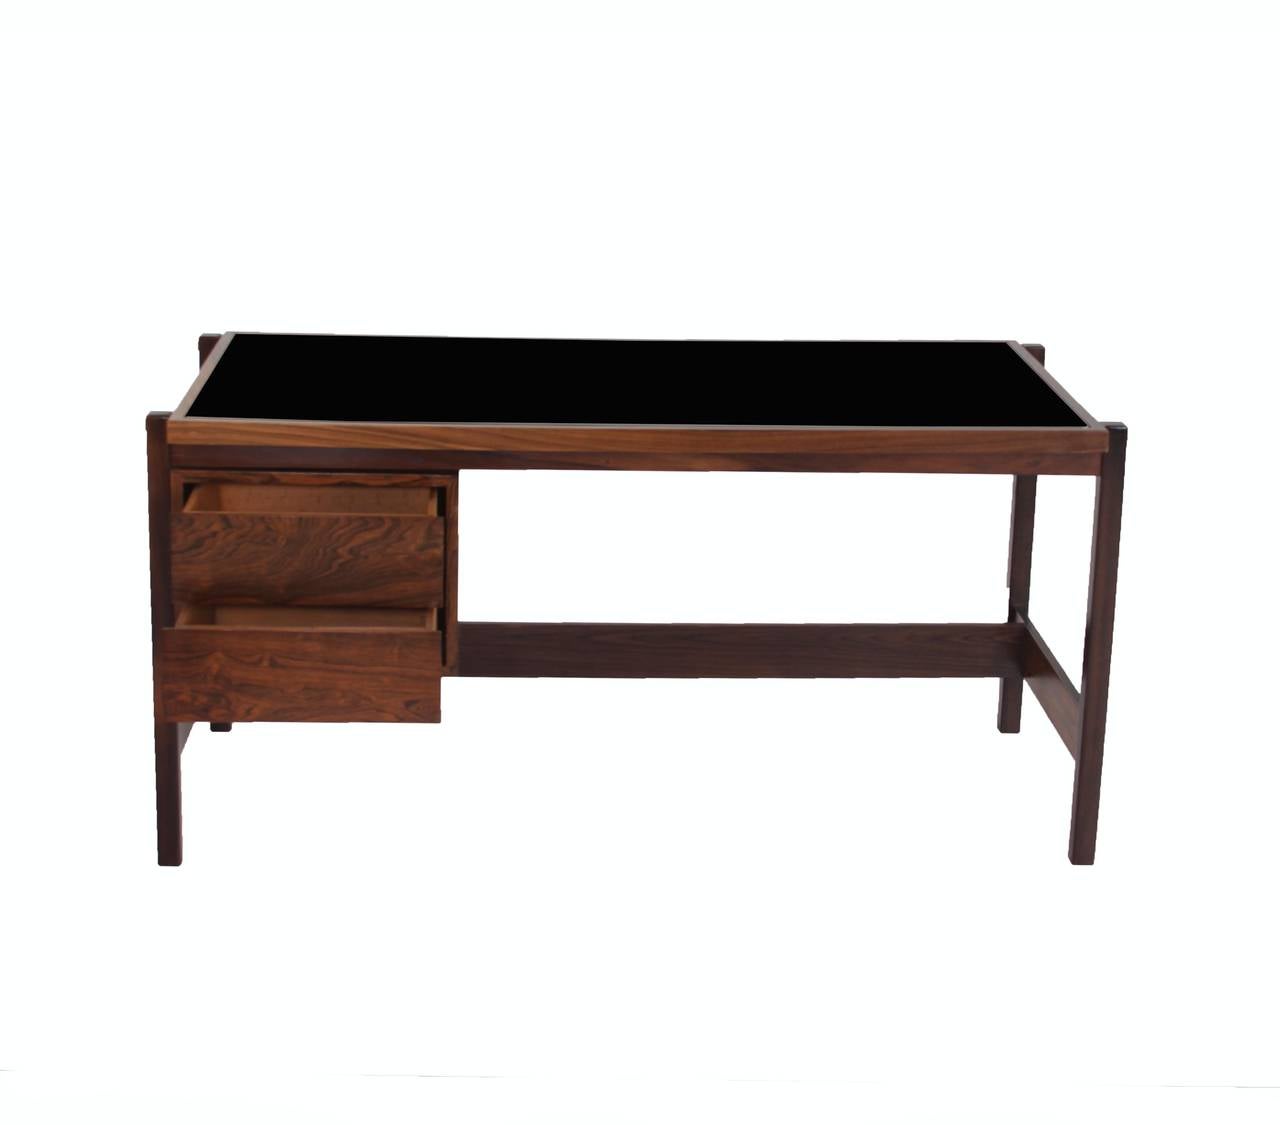 A solid Caviuna Wood desk from Brazil with two drawers, reverse painted black glass top designed by Sergio Rodrigues. 

Many pieces are stored in our warehouse, so please click on 